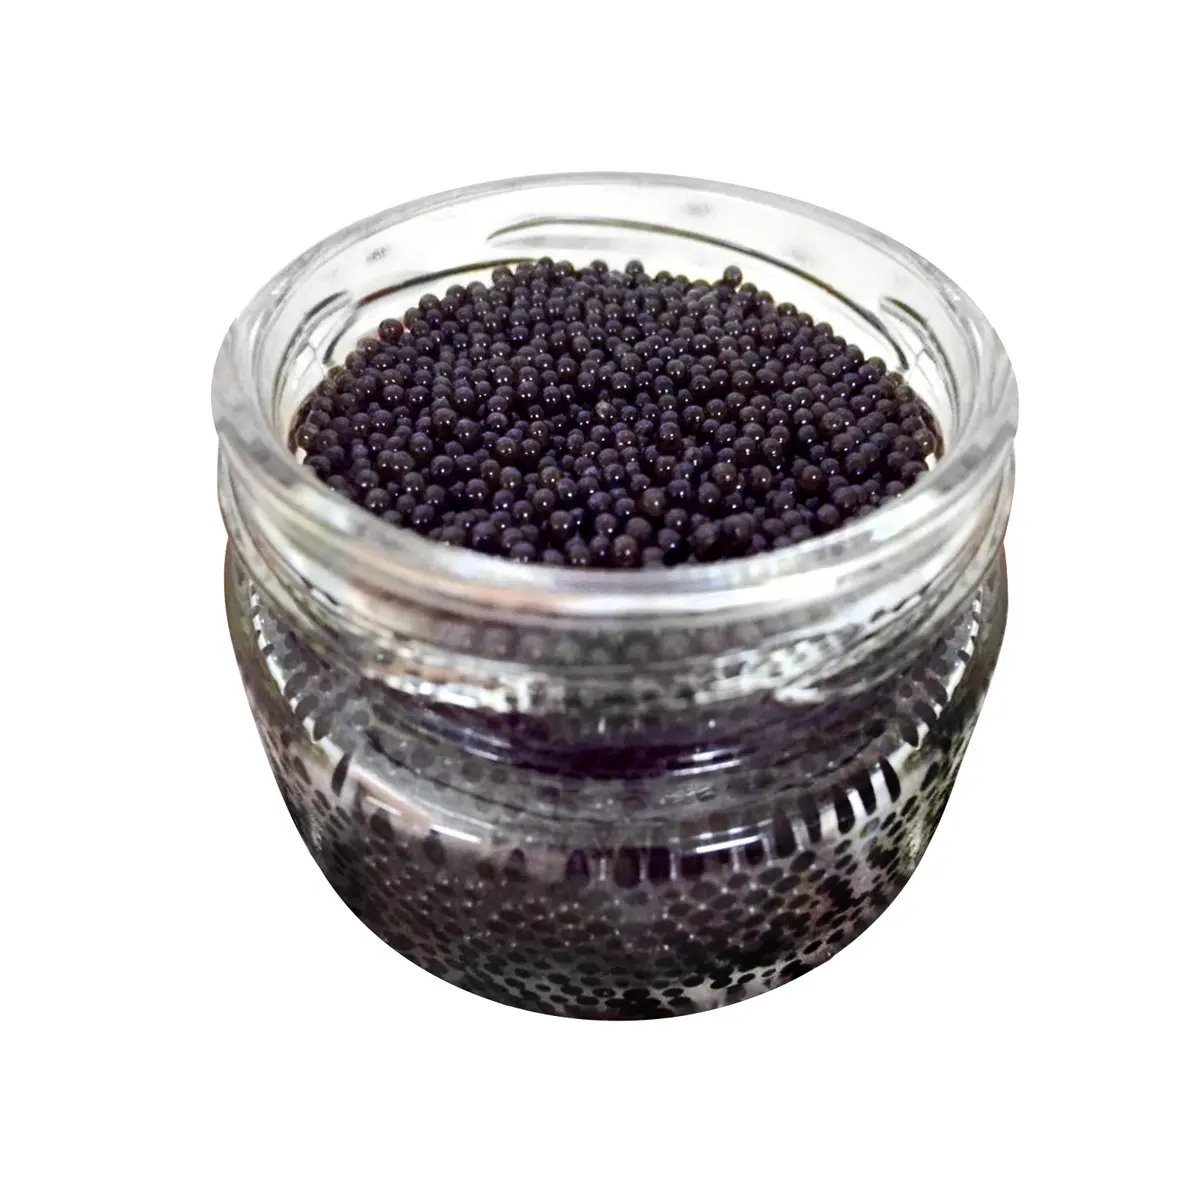 Pasteurized farm-raised bester fish roe packaged in glass jar from fish farm